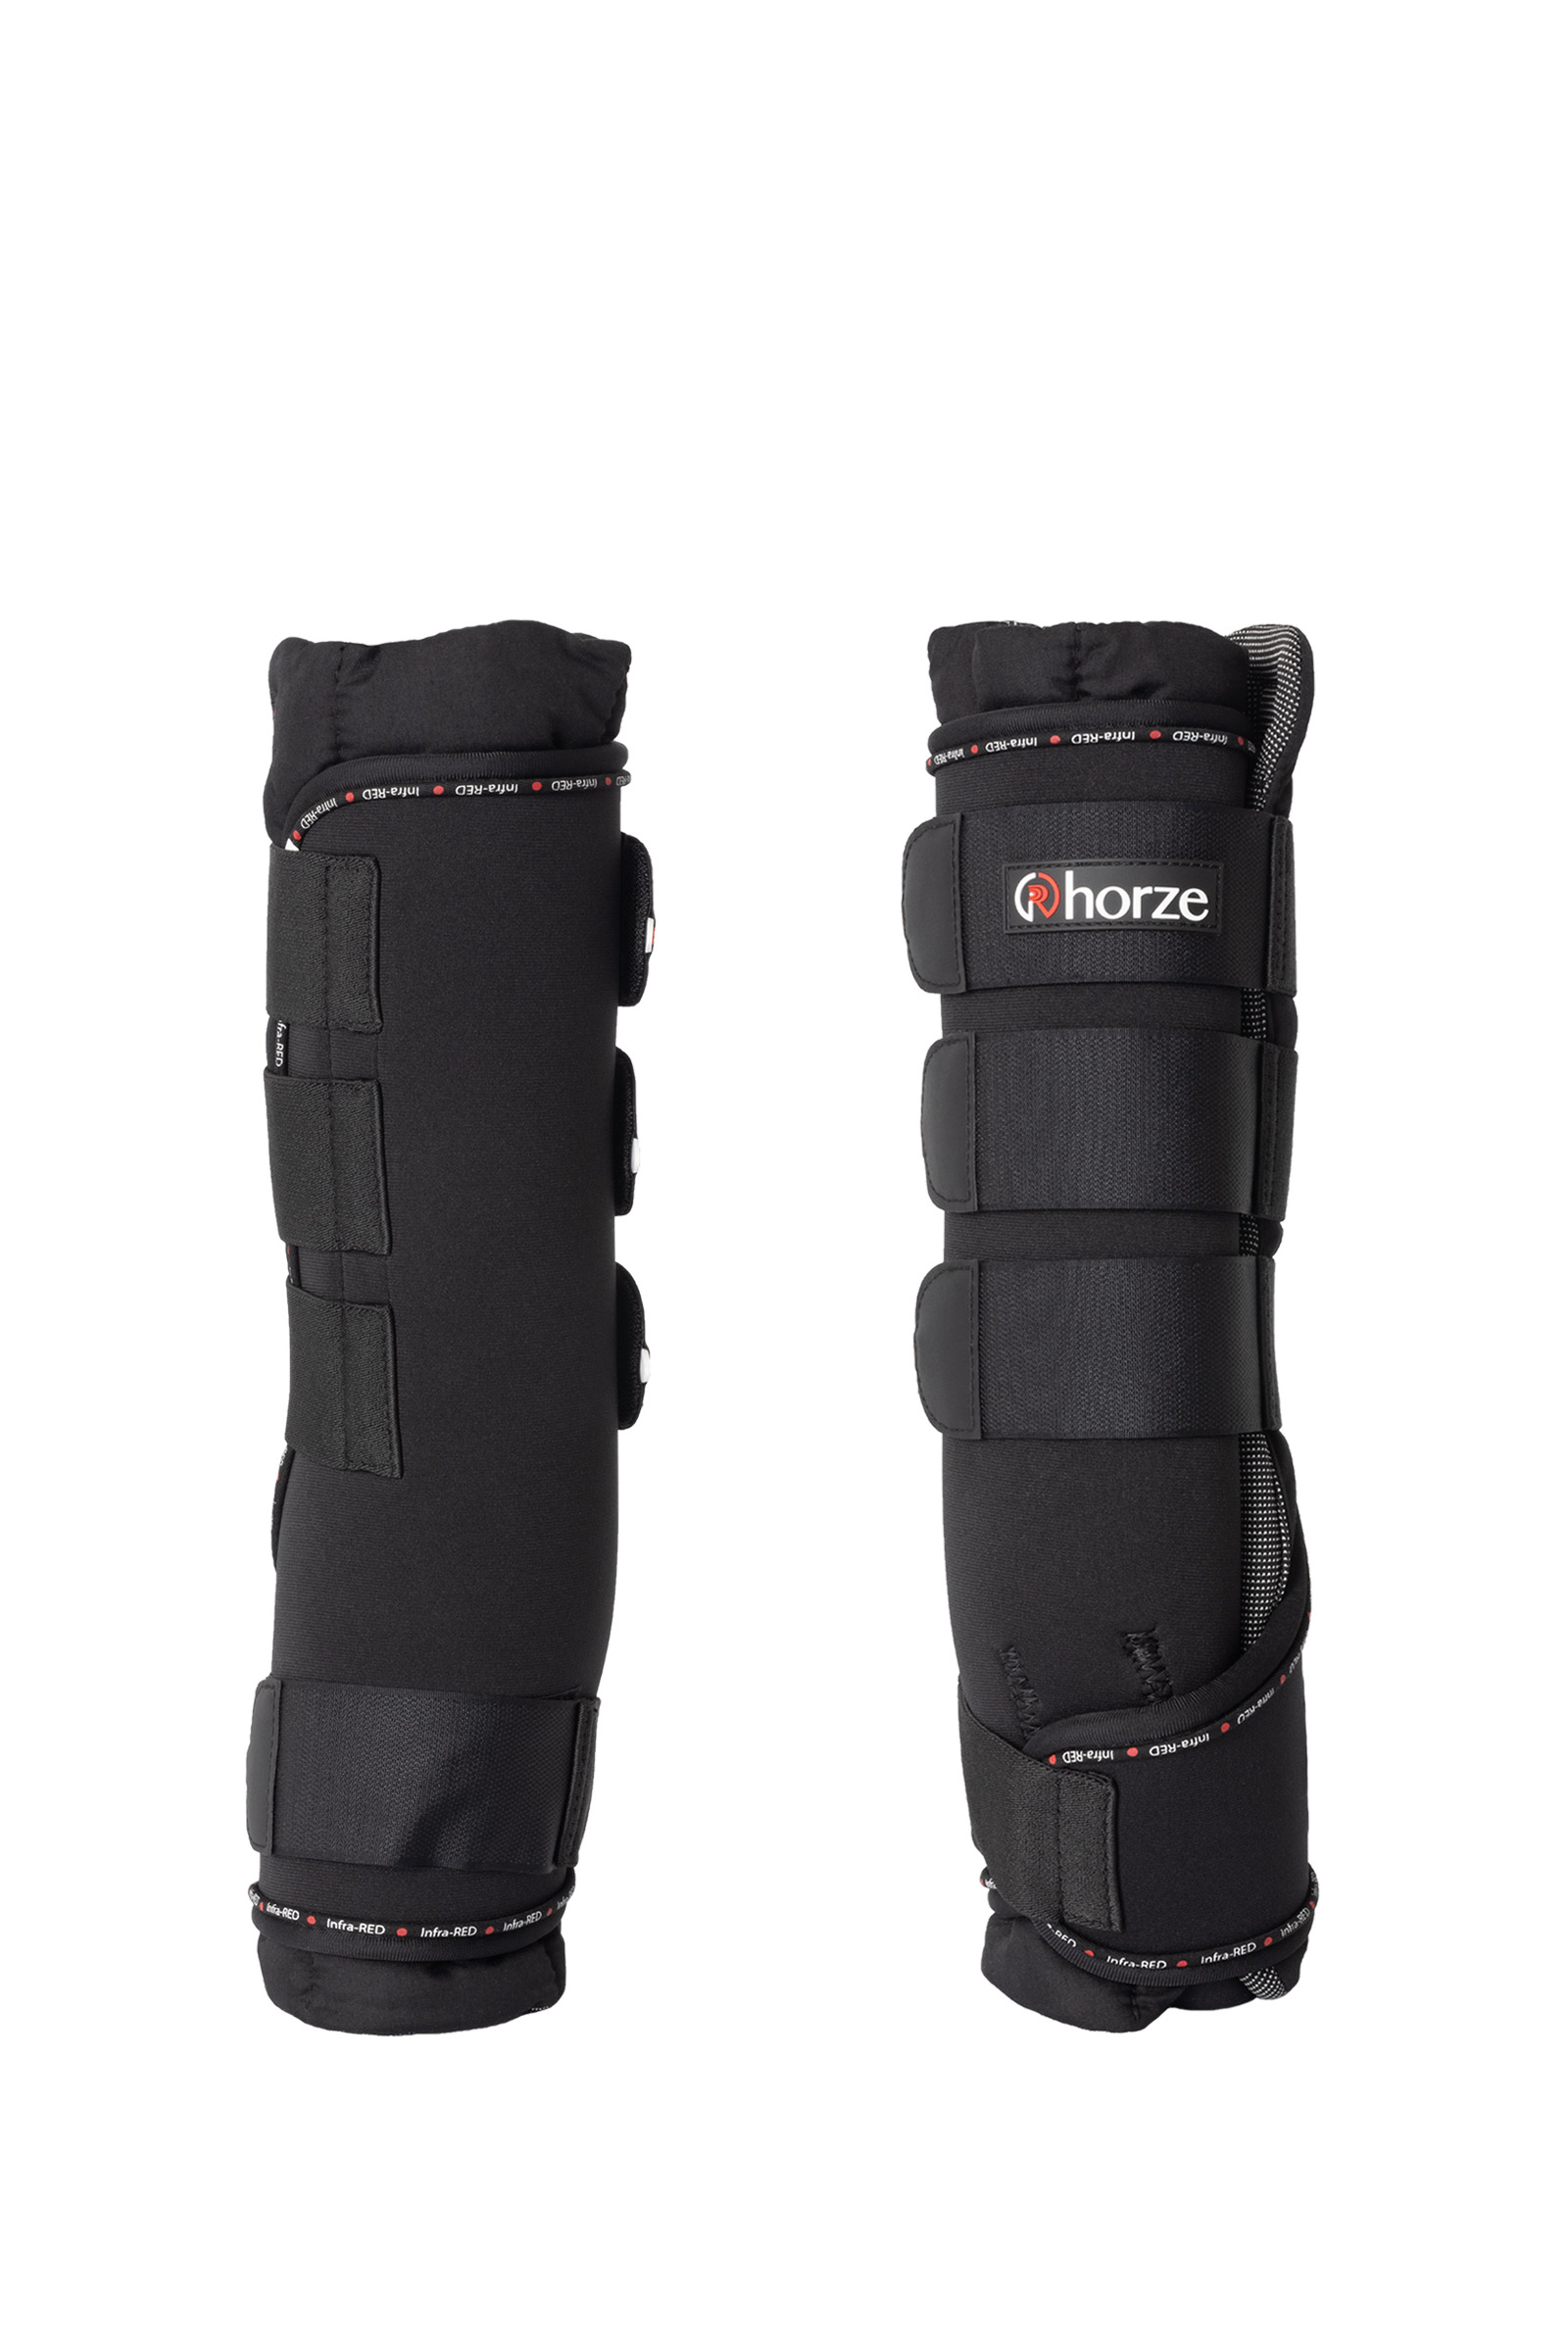 Horze Cairo Infra-red Stable Boots